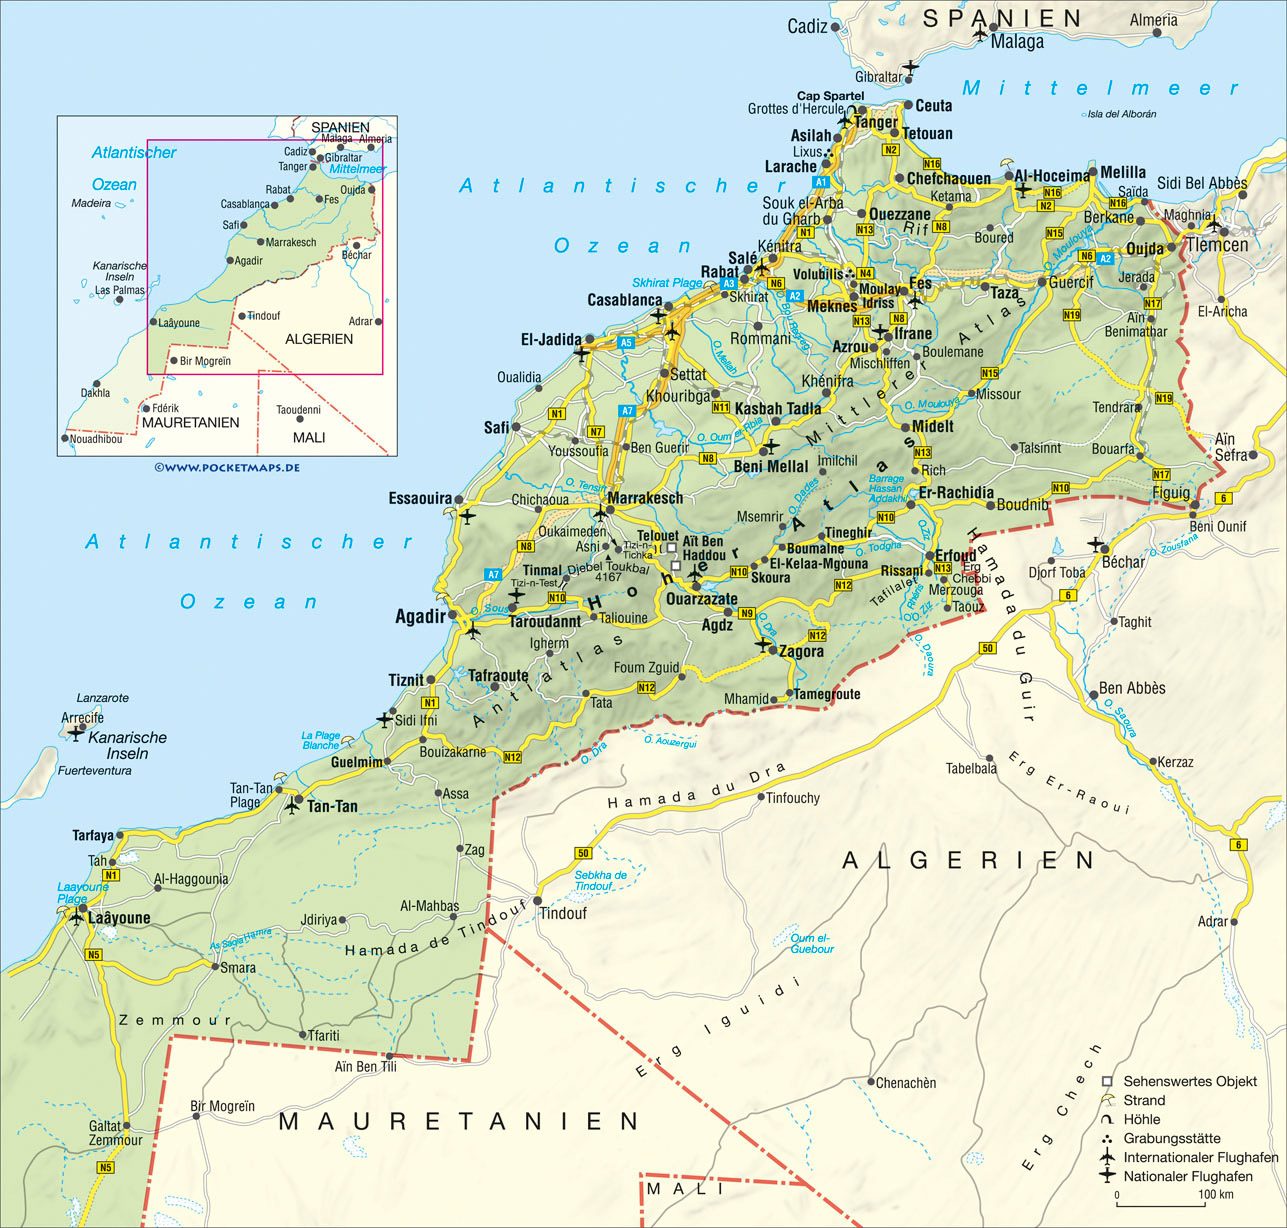 Road map of Morocco with relief, cities and airports | Vidiani.com